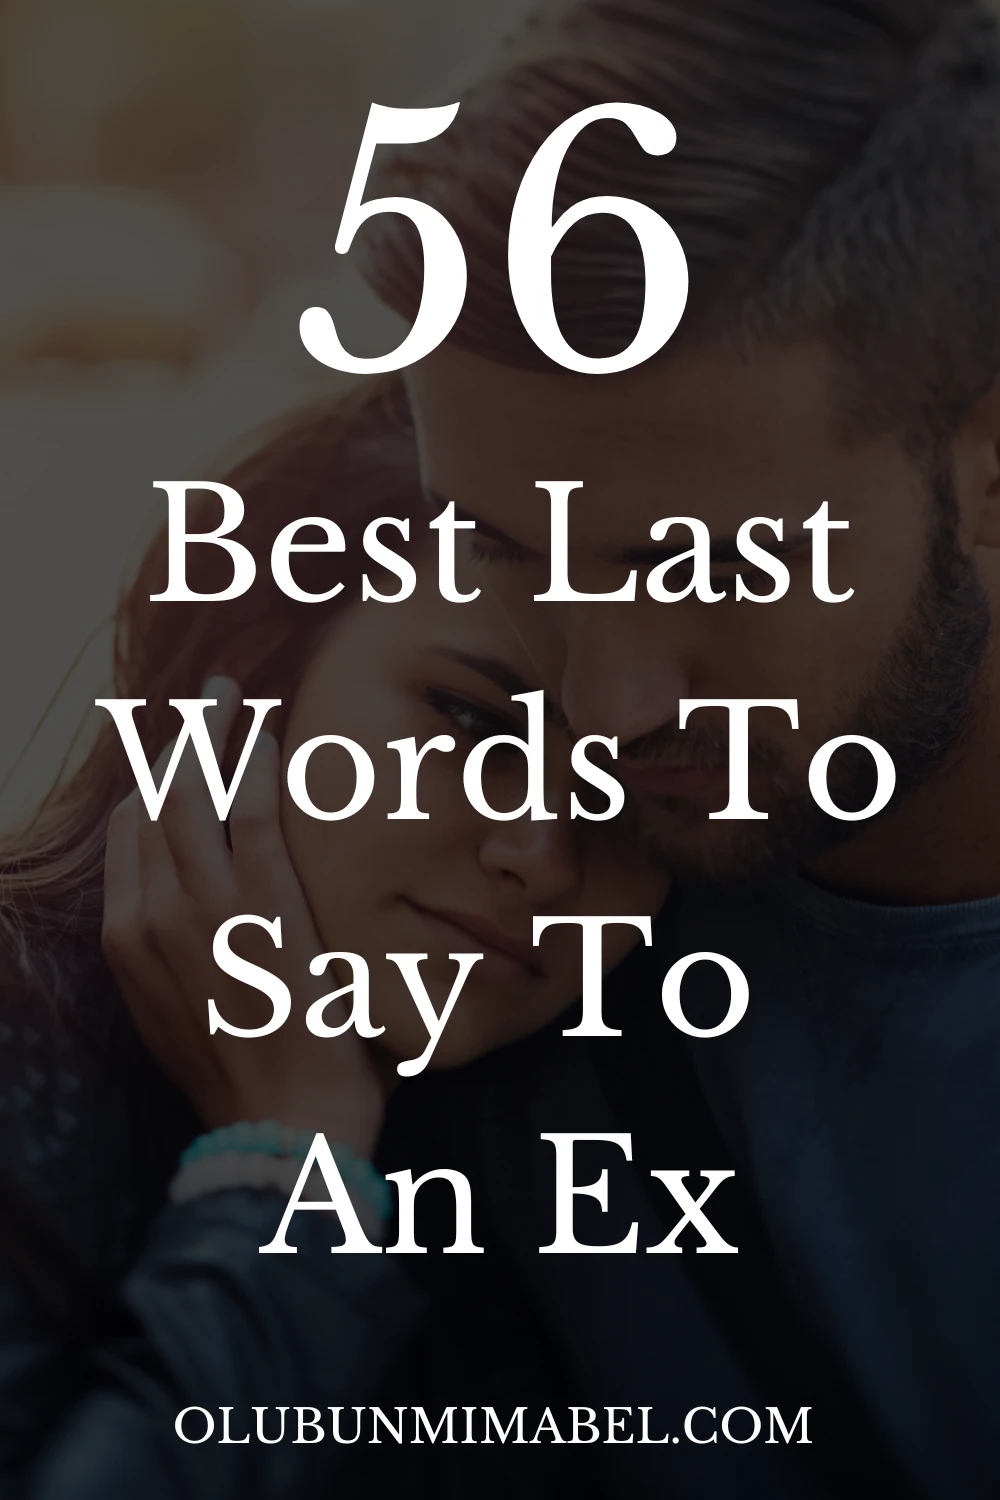 Best Last Words To Say To An Ex